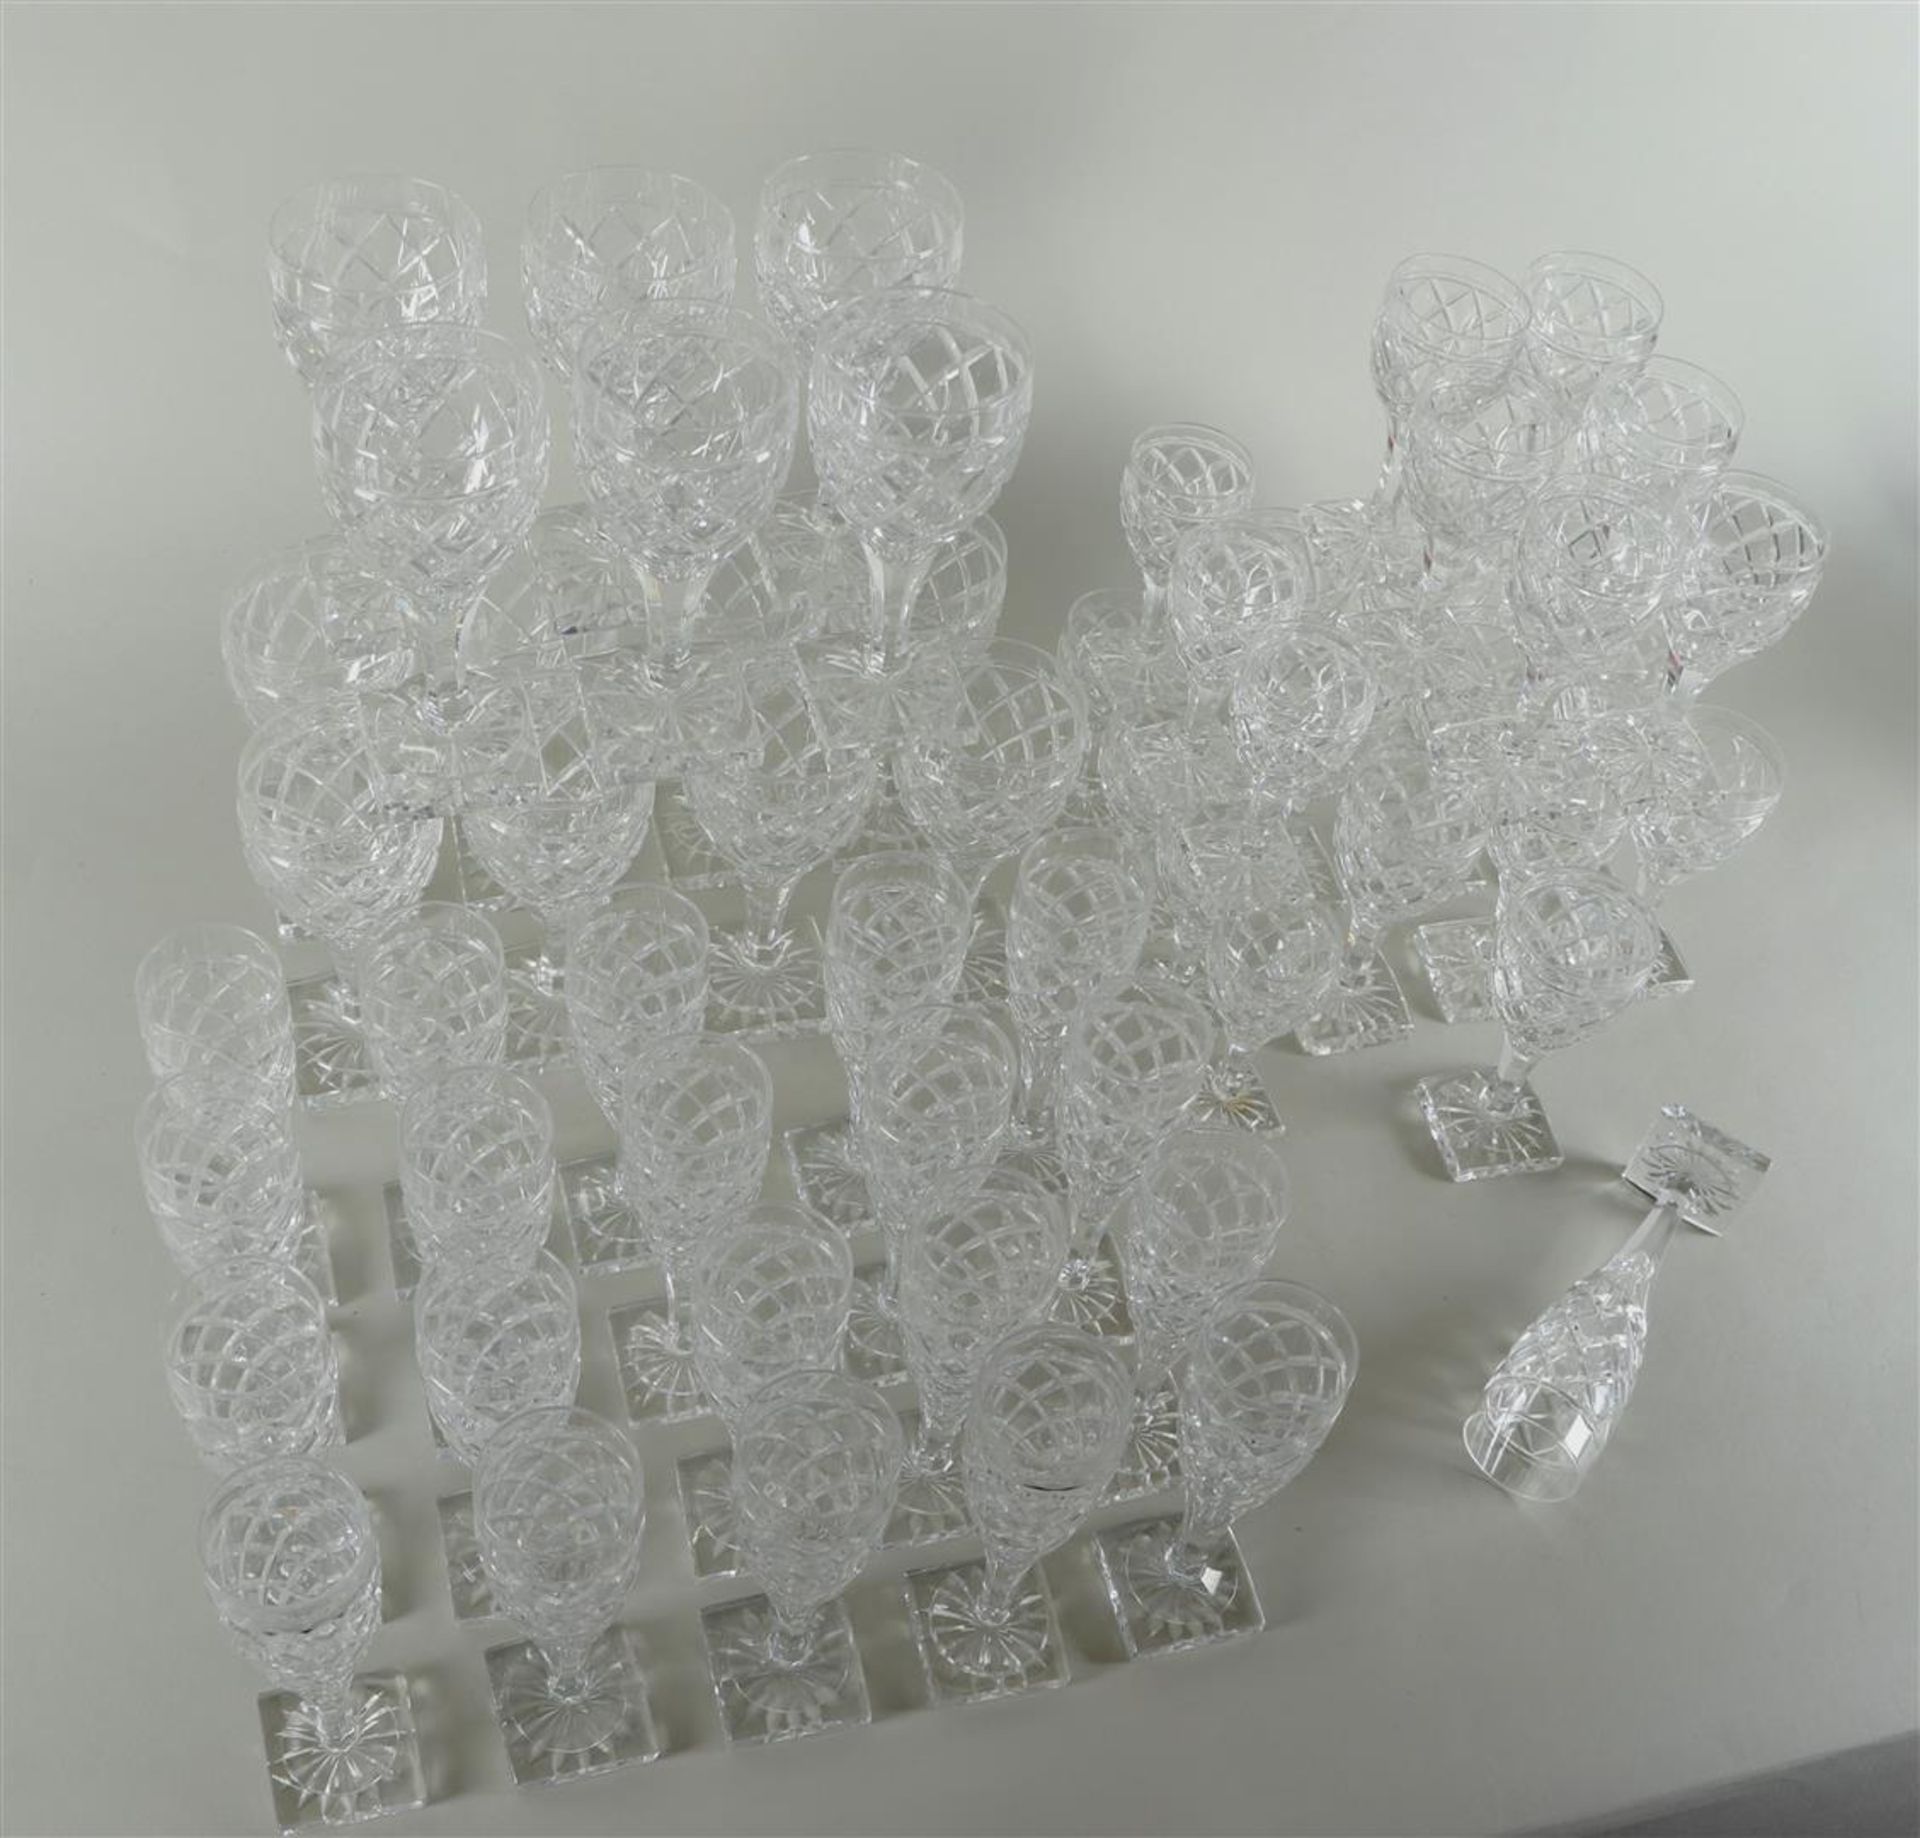 Large Lot of "Bohemian" Cut Clear Crystal Glass - Image 2 of 2